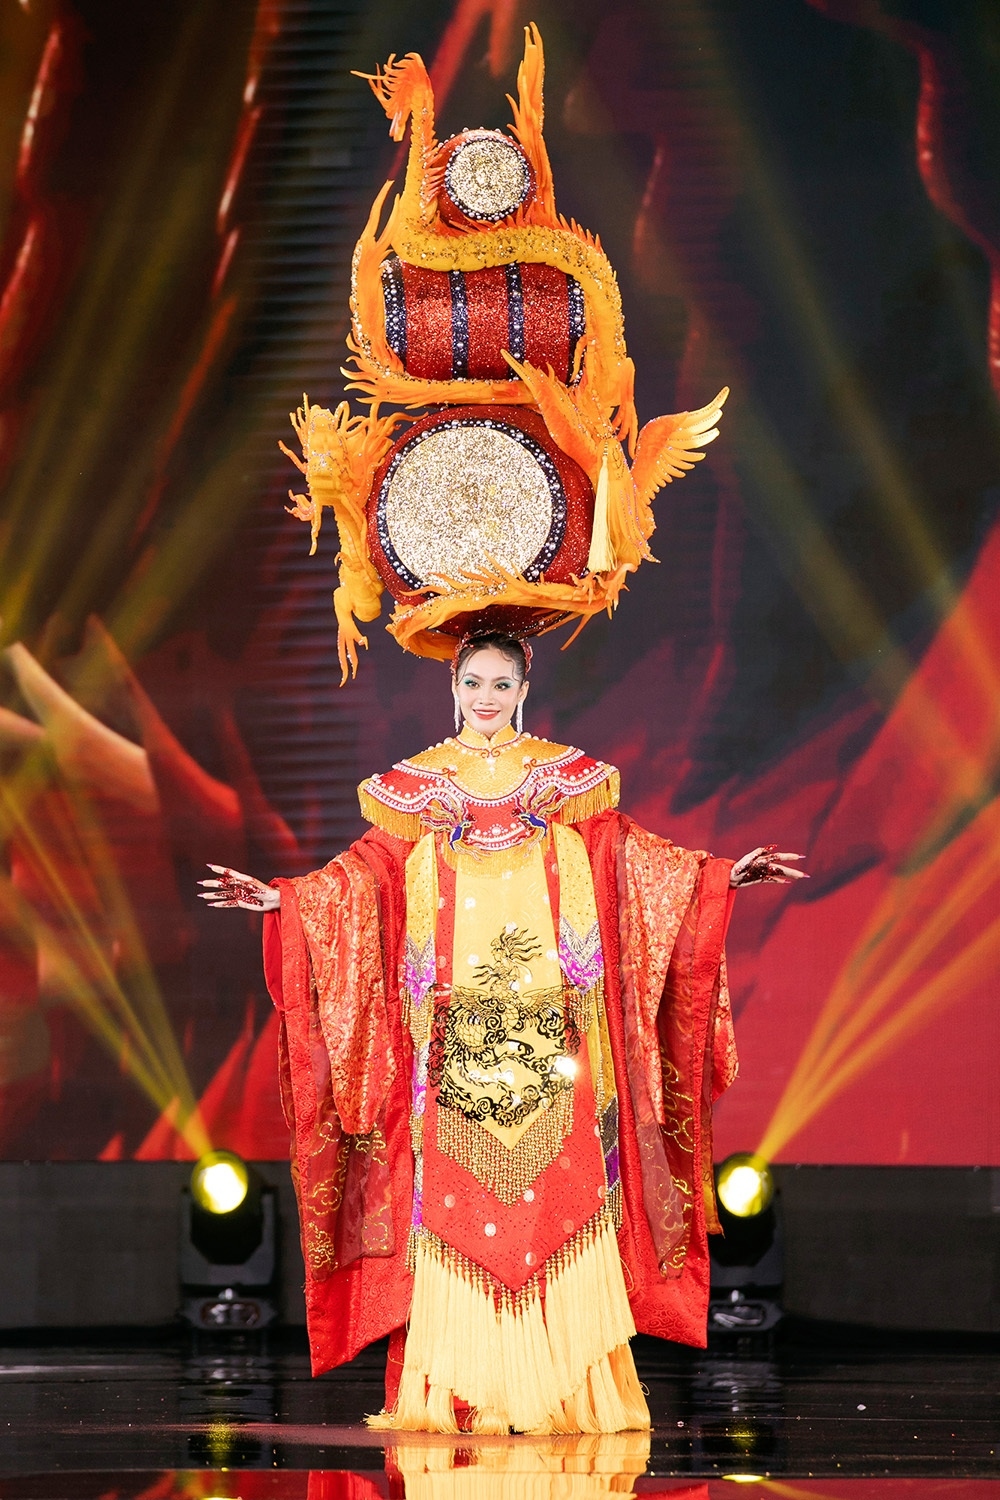 The winner will go on to represent the country to compete in the Miss Grand International 2023 pageant, which will be hosted by Vietnam this October.